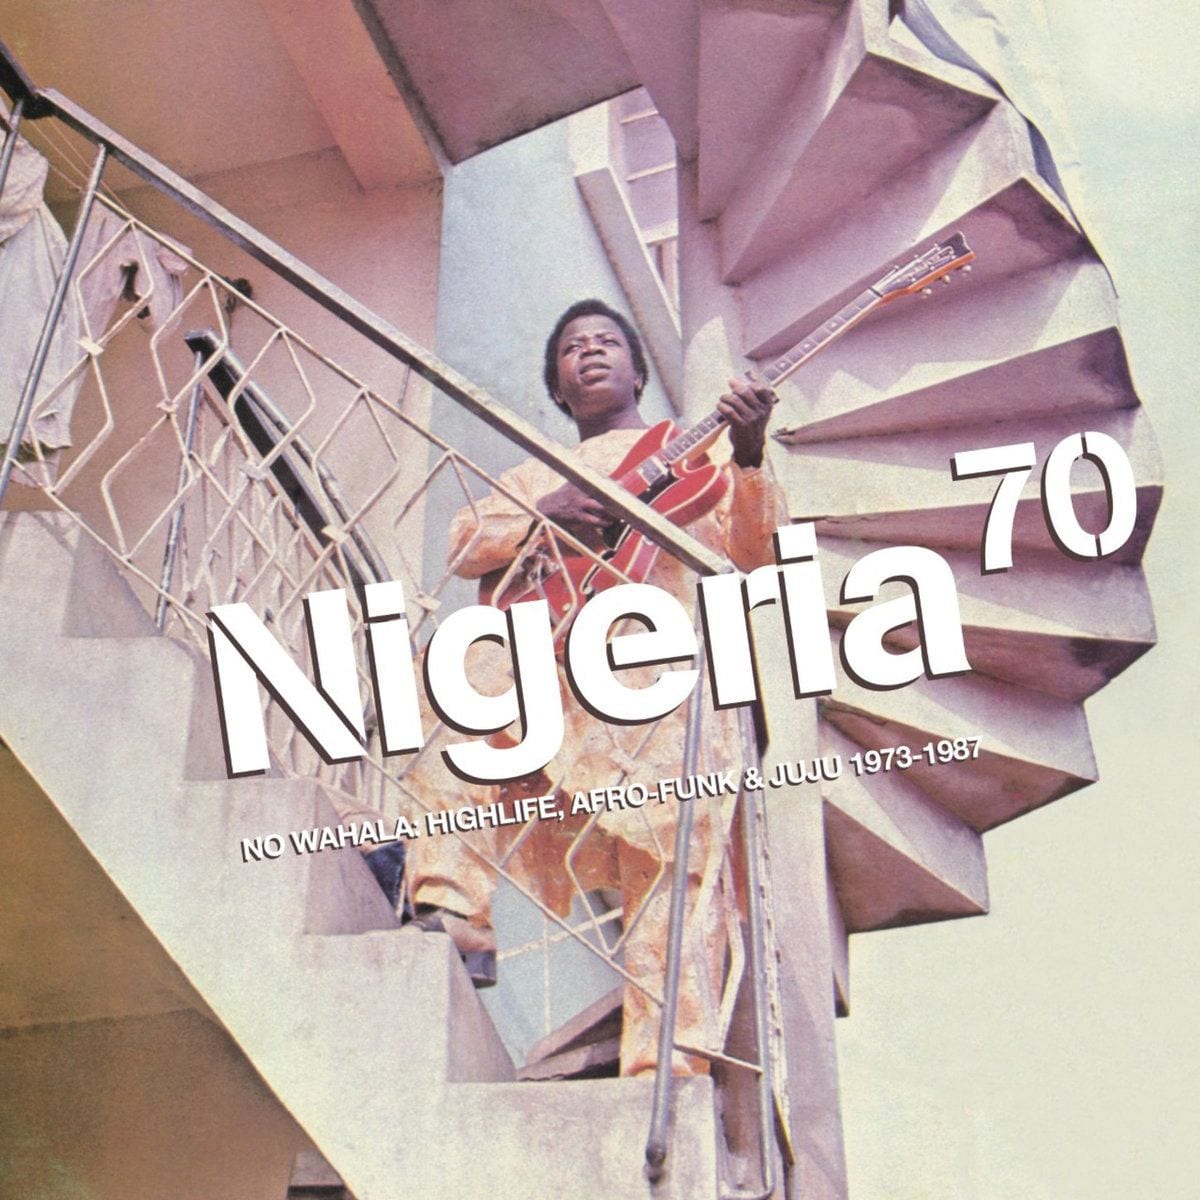 The Sublime ‘Nigeria 70’ Series Continues with ‘No Wahala: Highlife, Afro-Funk & Juju 1973-1987’